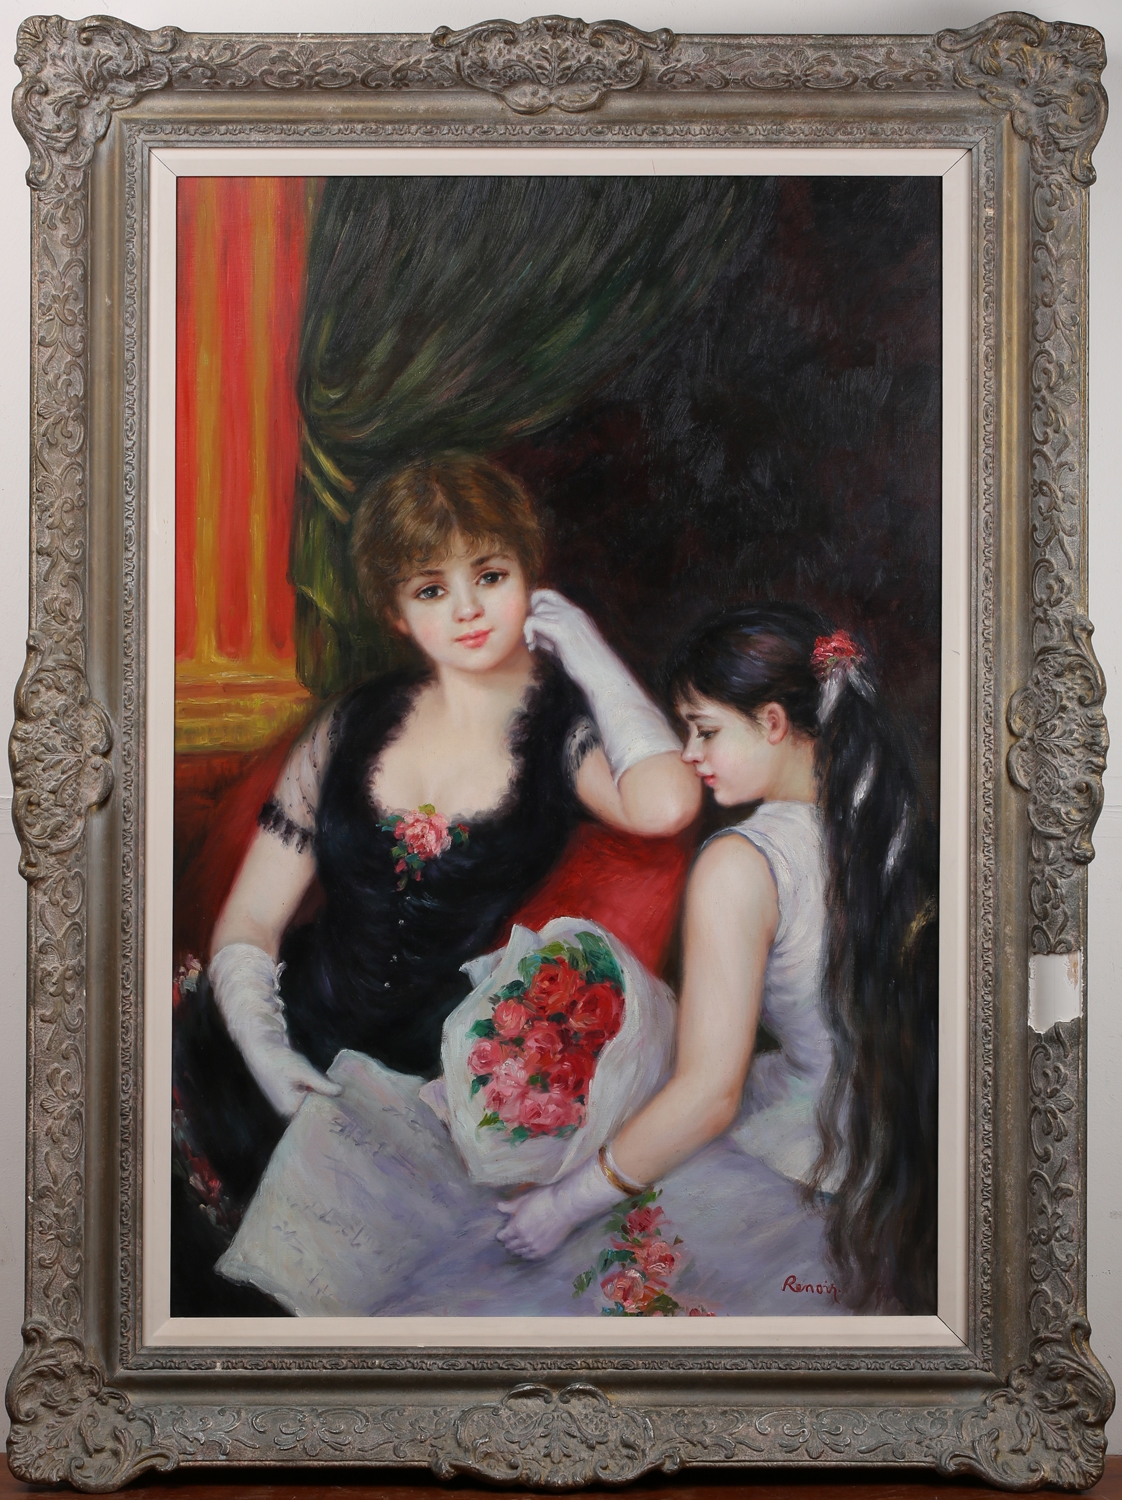 Artwork by Pierre-Auguste Renoir, A Box at the Theatre (At the Concert), Made of oil on canvas